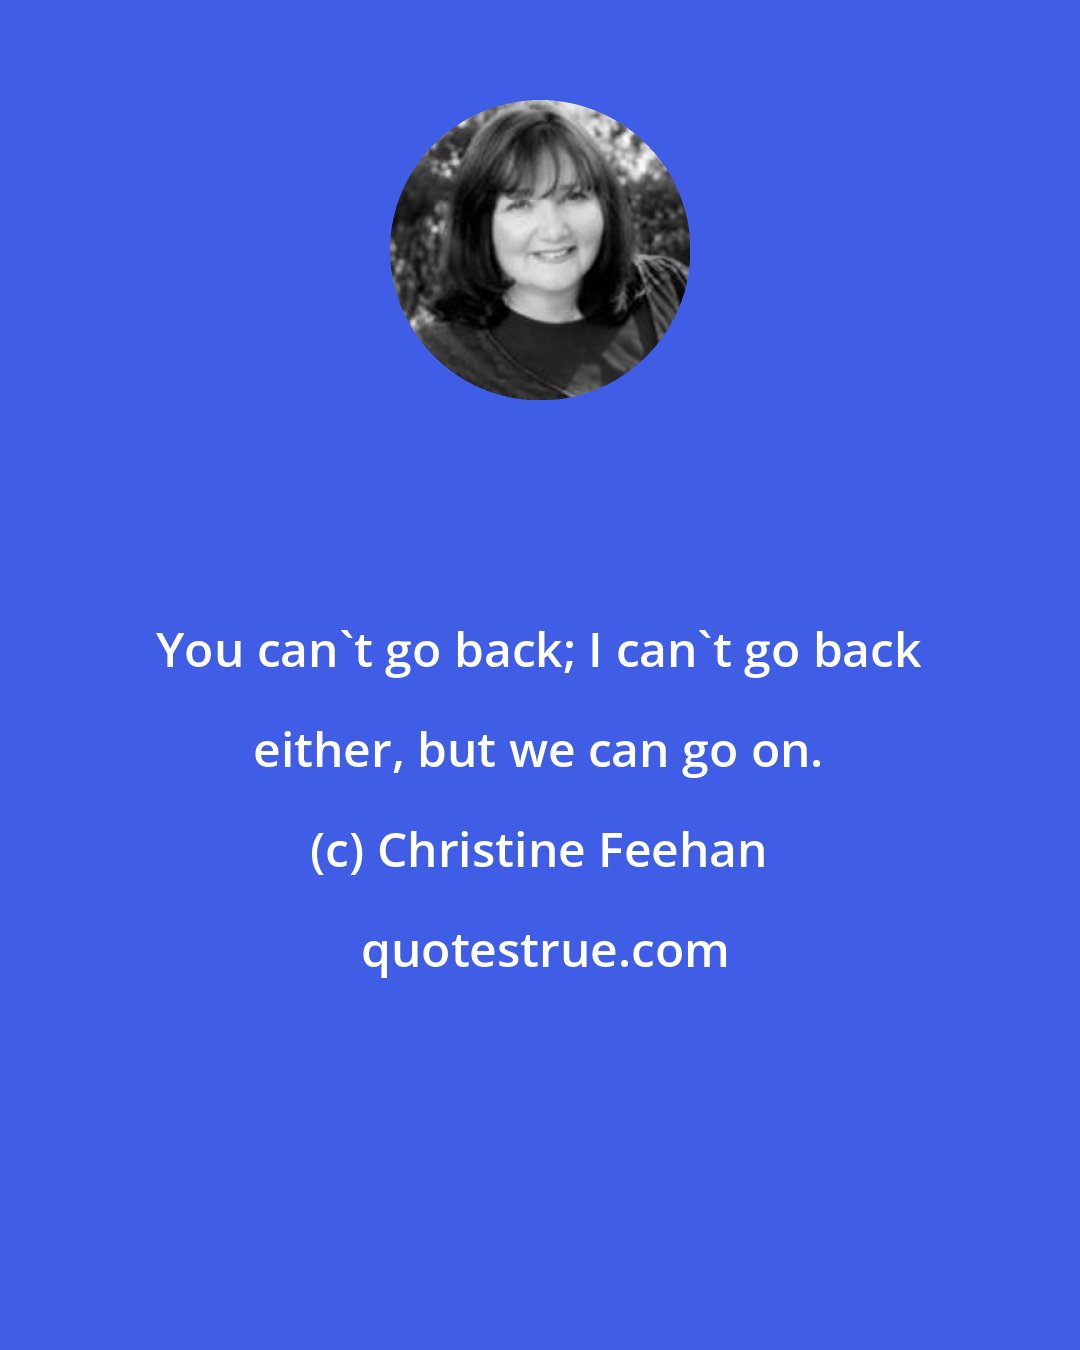 Christine Feehan: You can't go back; I can't go back either, but we can go on.